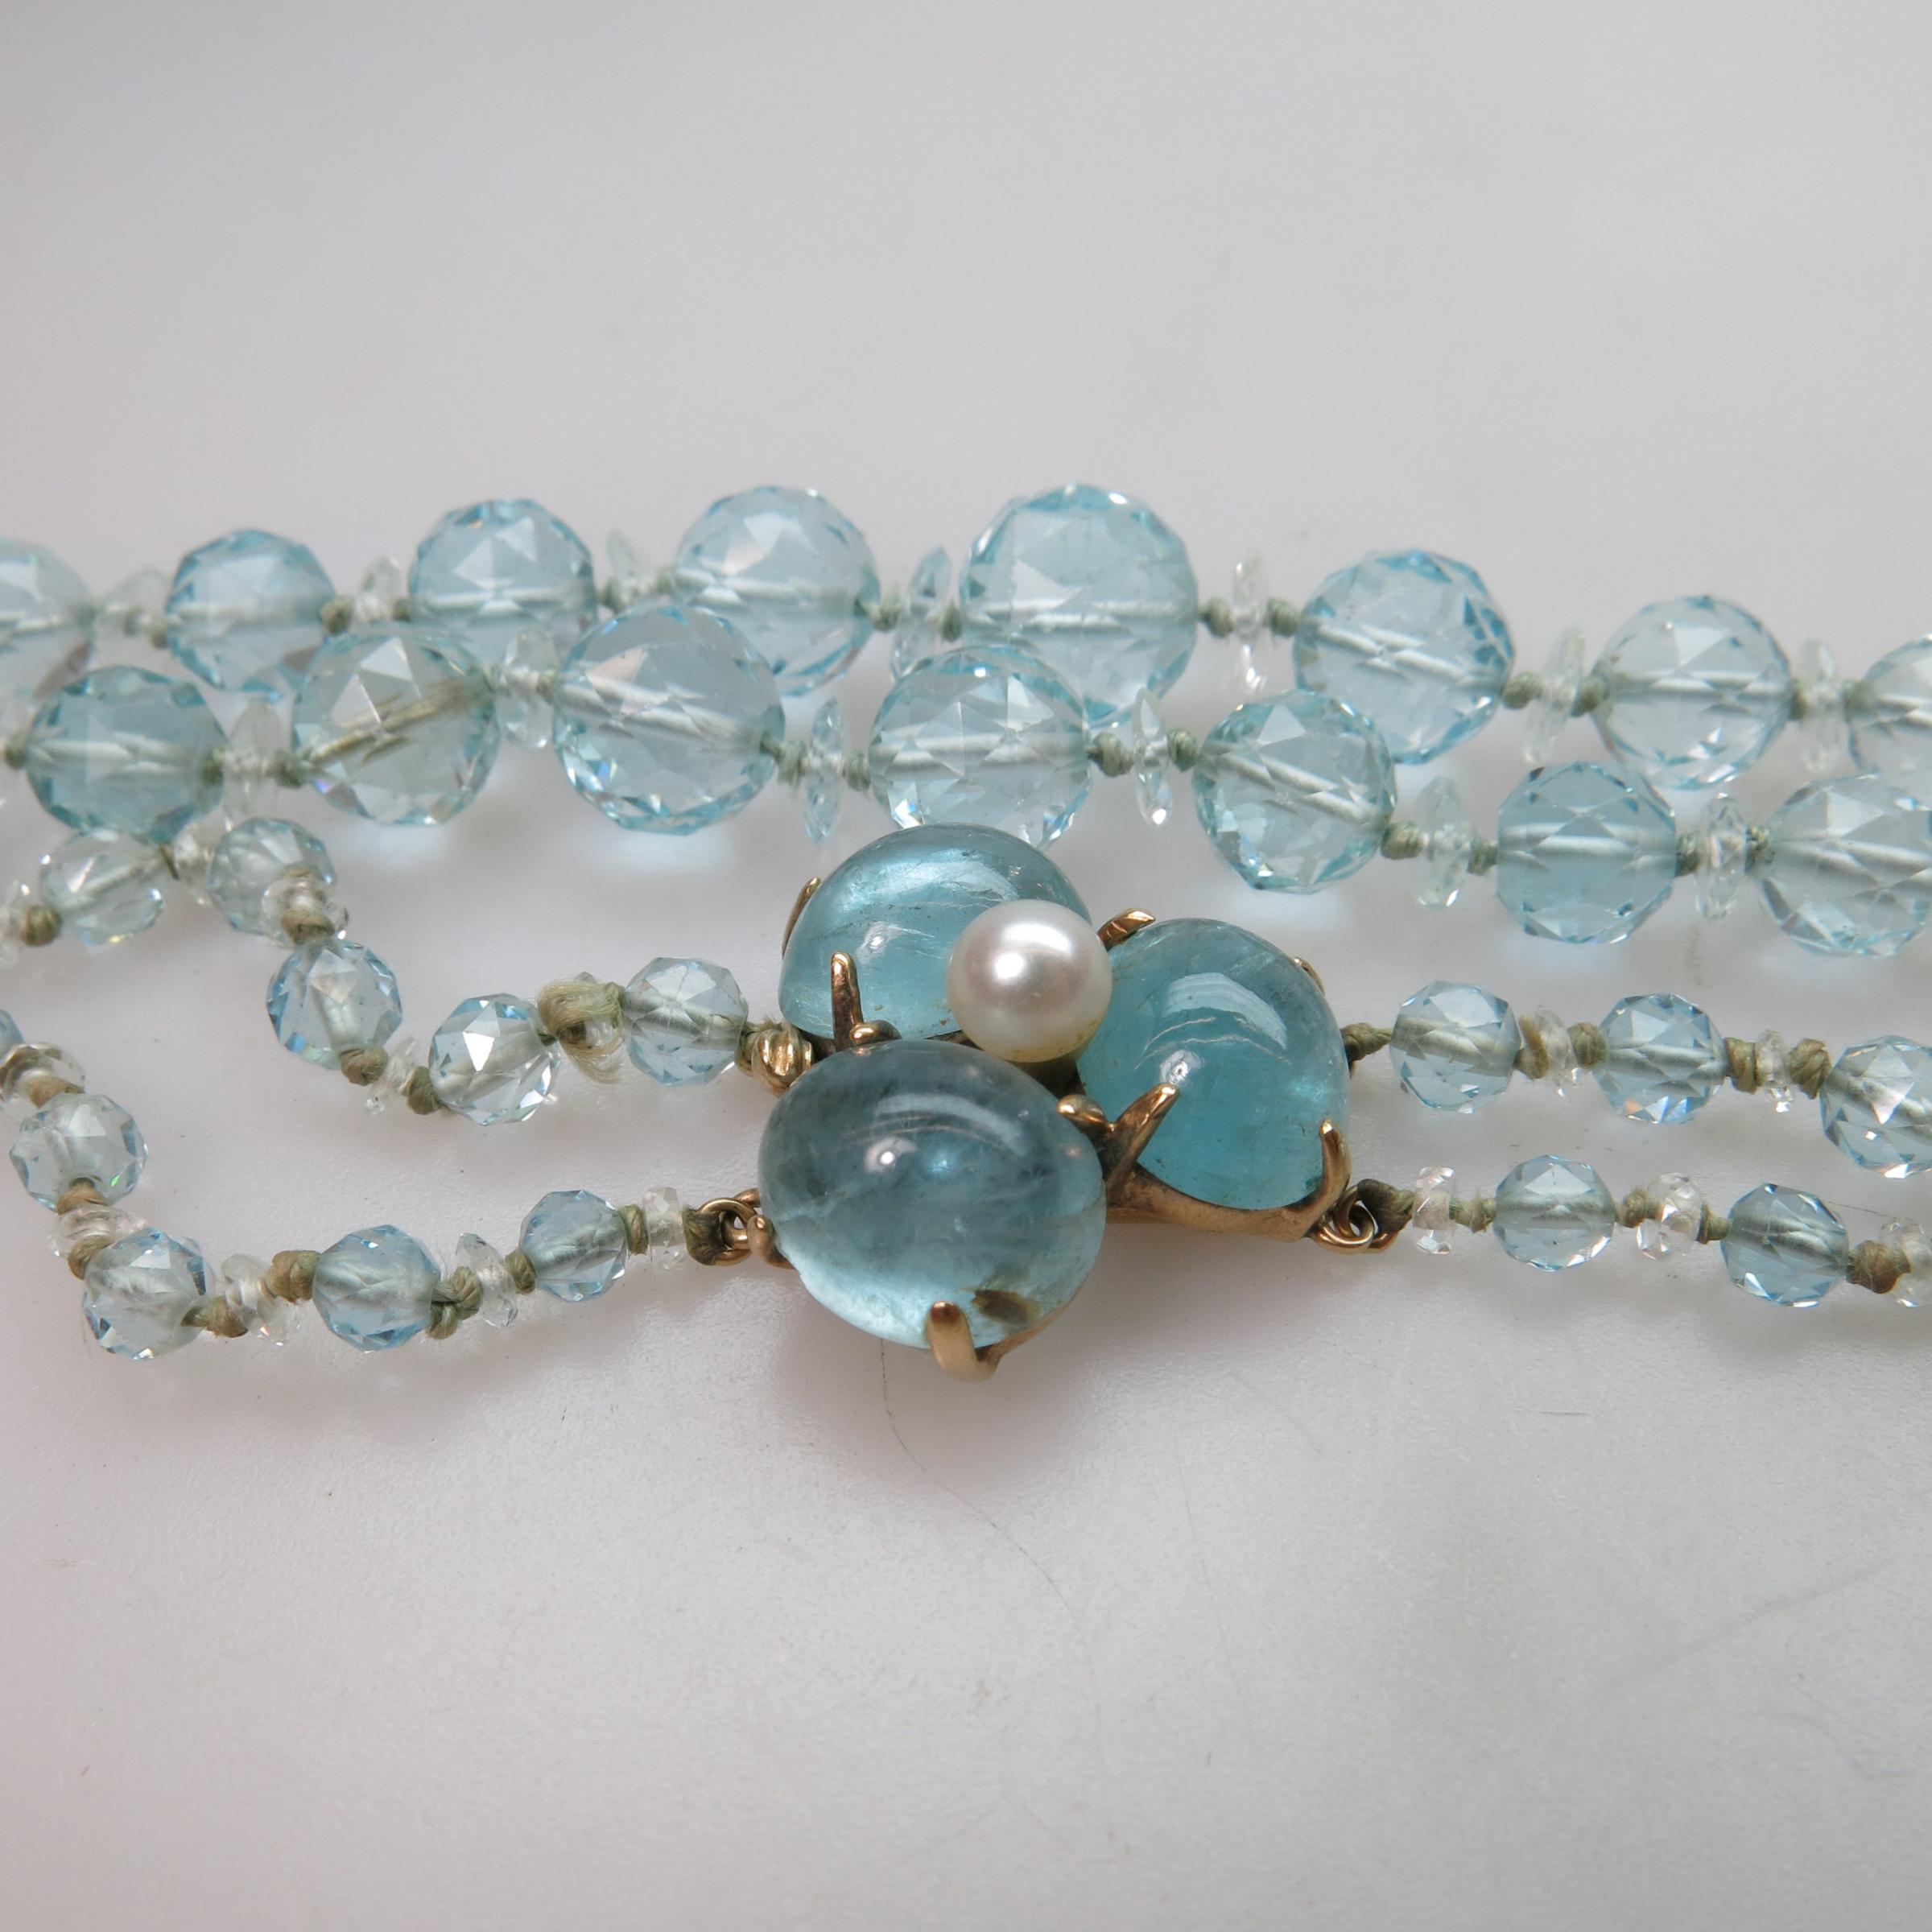 Double Strand Graduated Facetted Aquamarine Bead Necklace